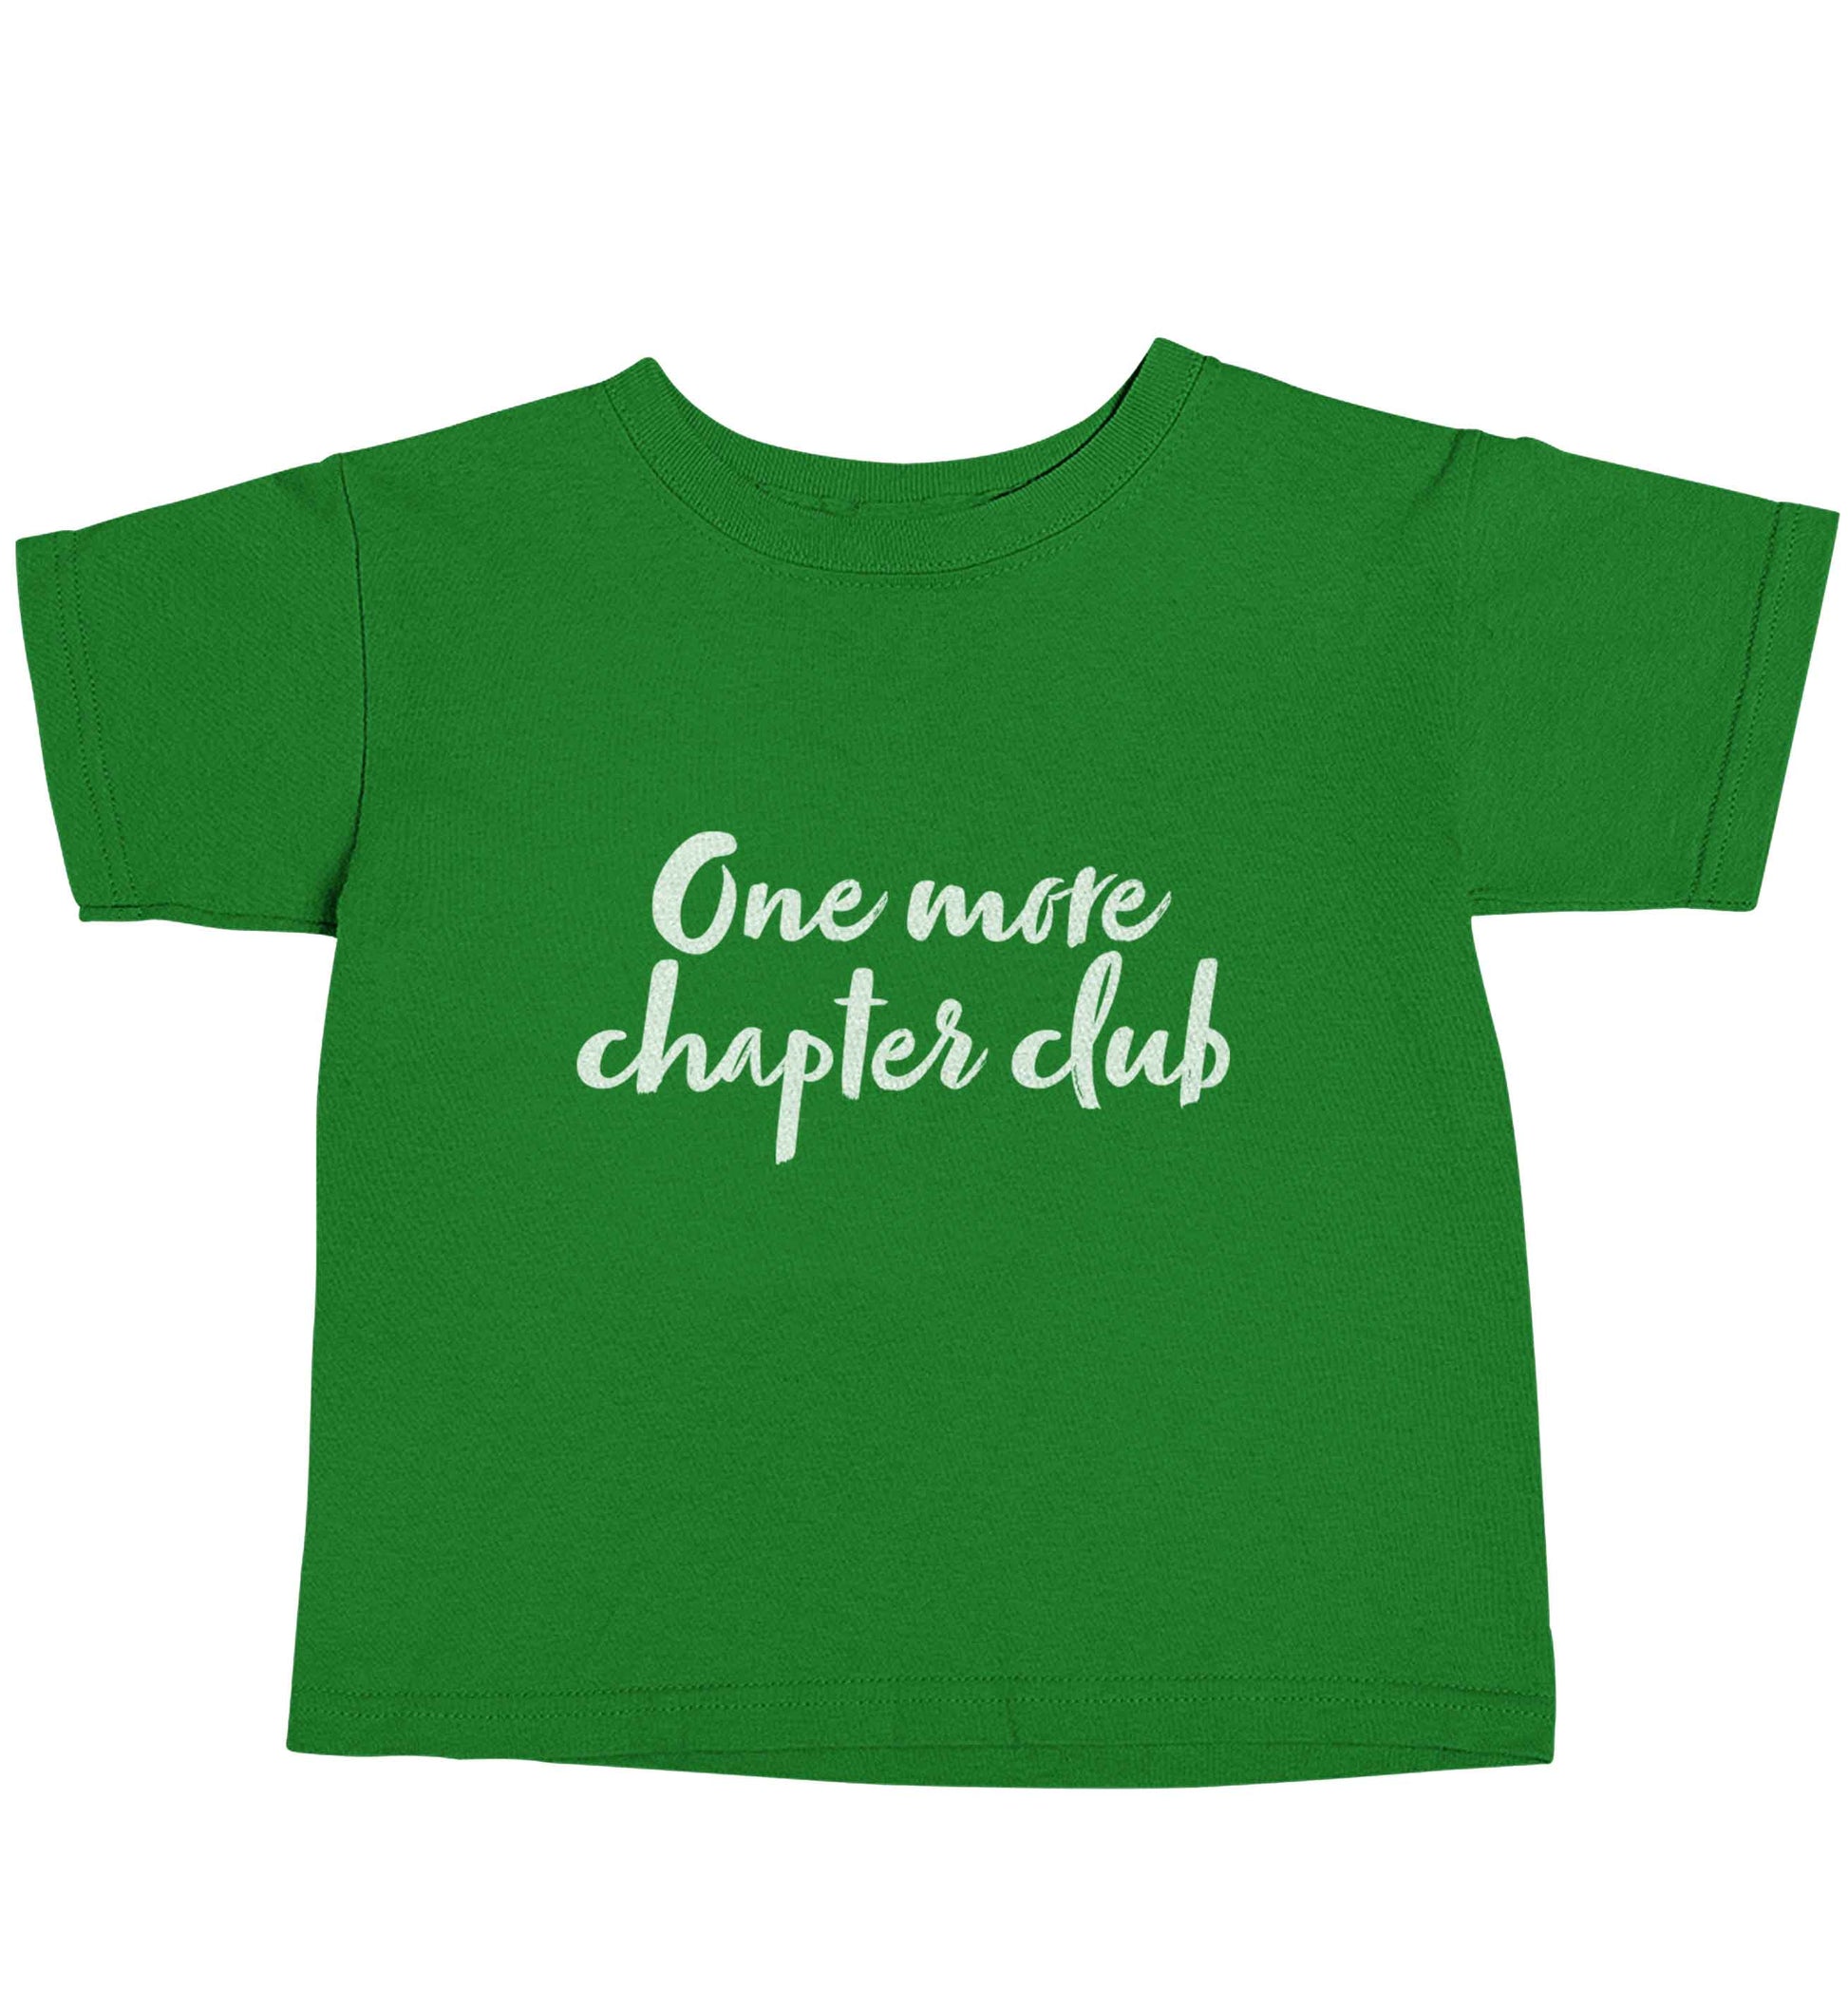 One more chapter club Kit green baby toddler Tshirt 2 Years